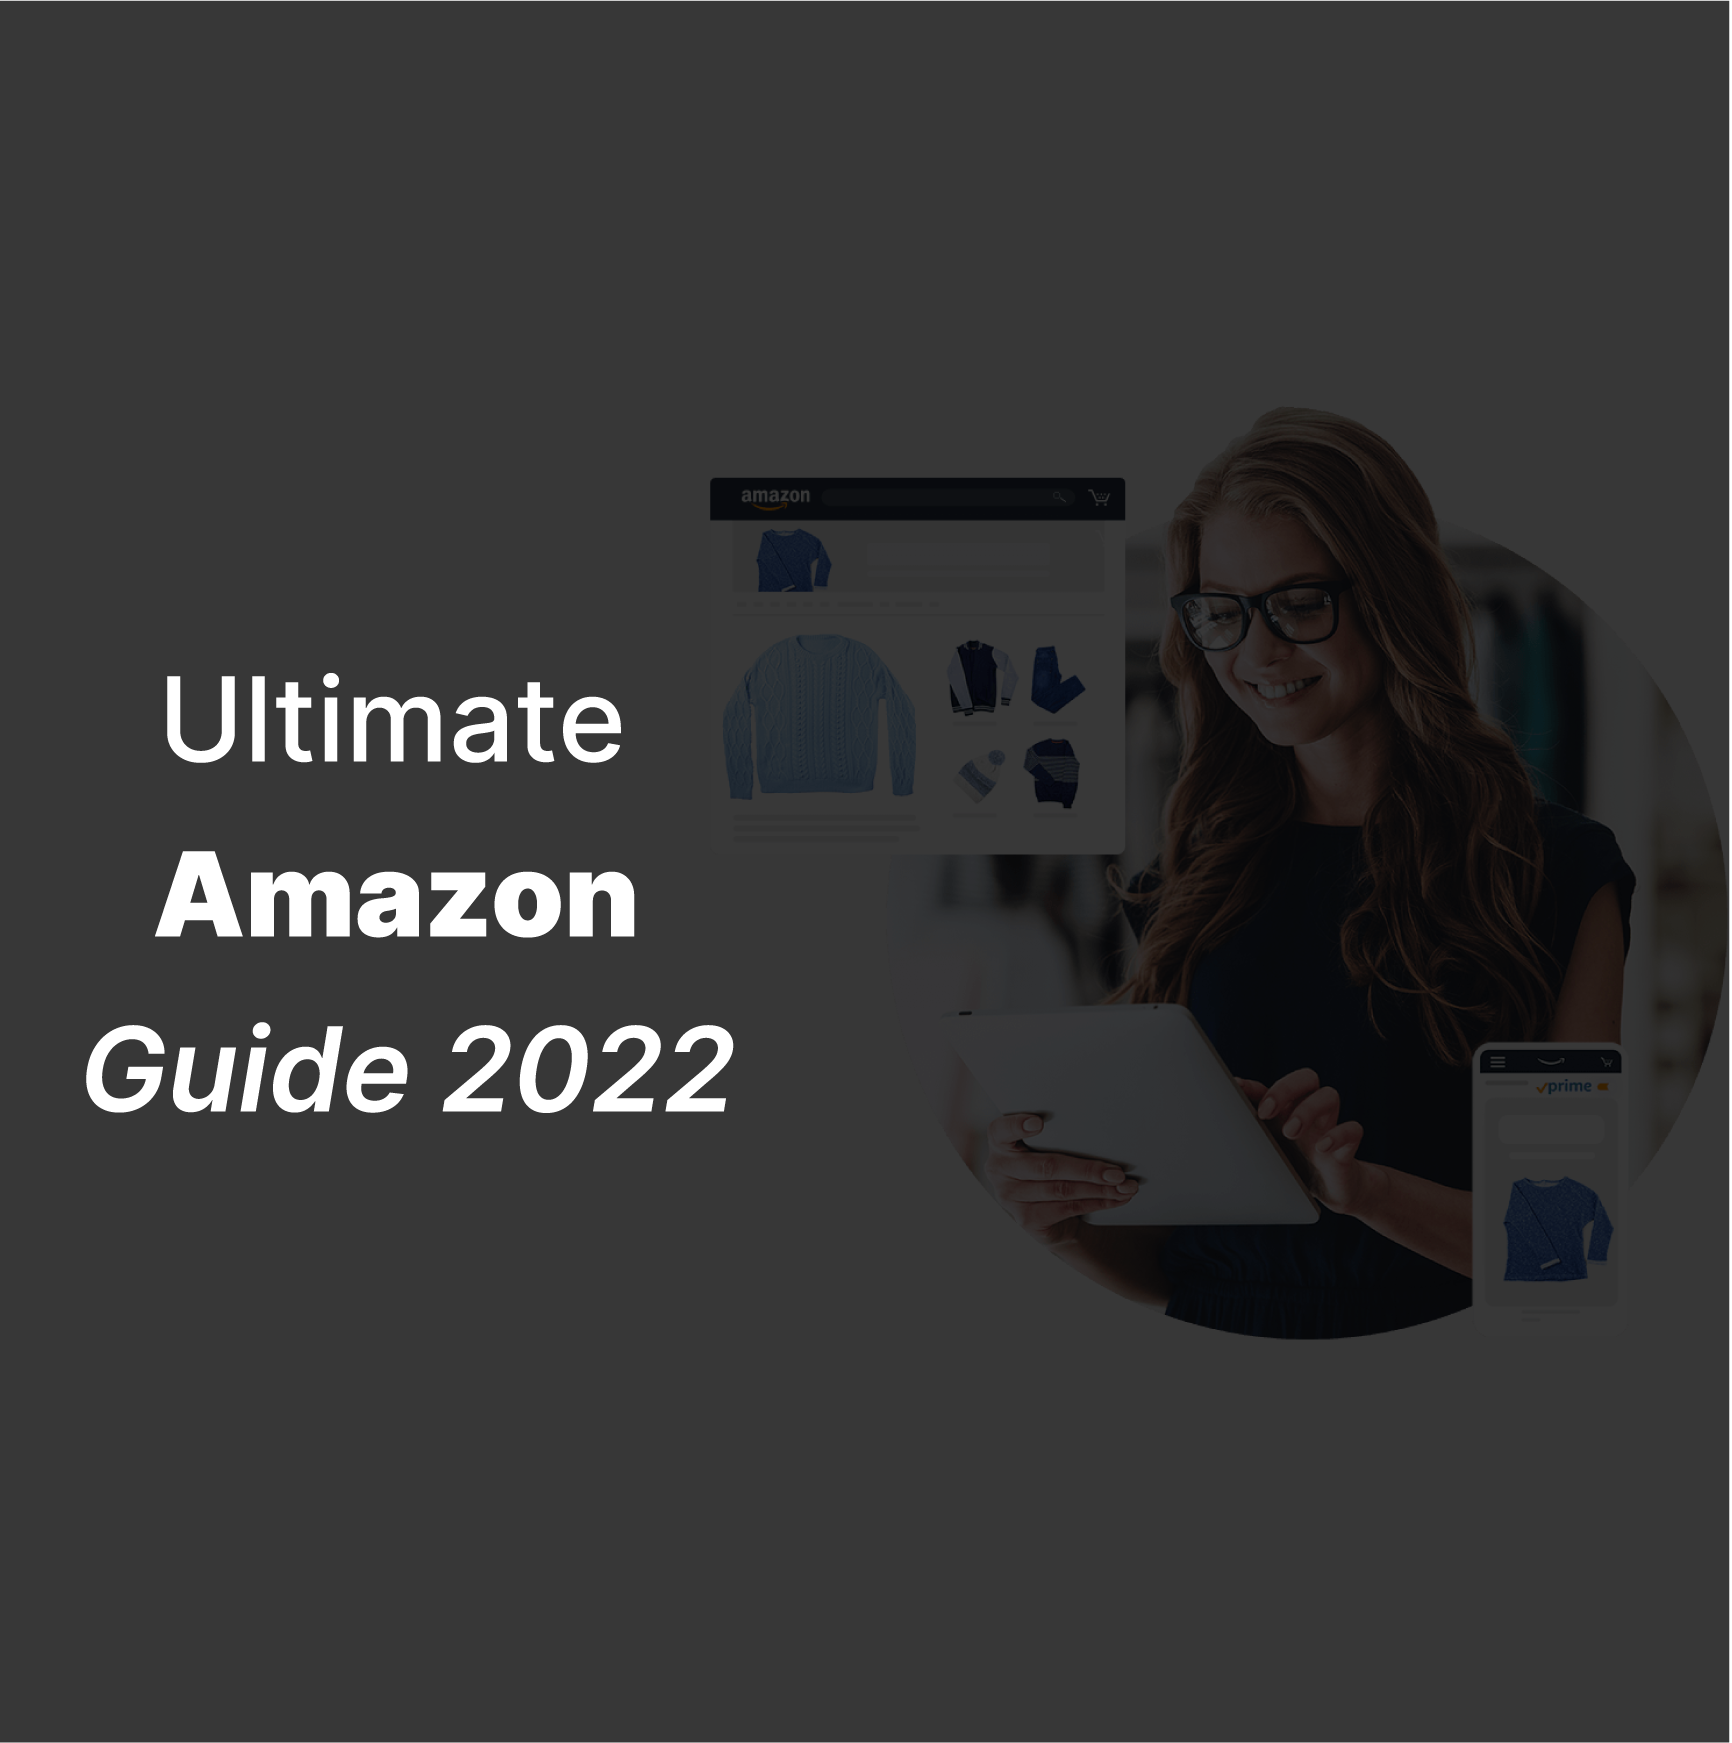 The ultimate Amazon guide for 2022